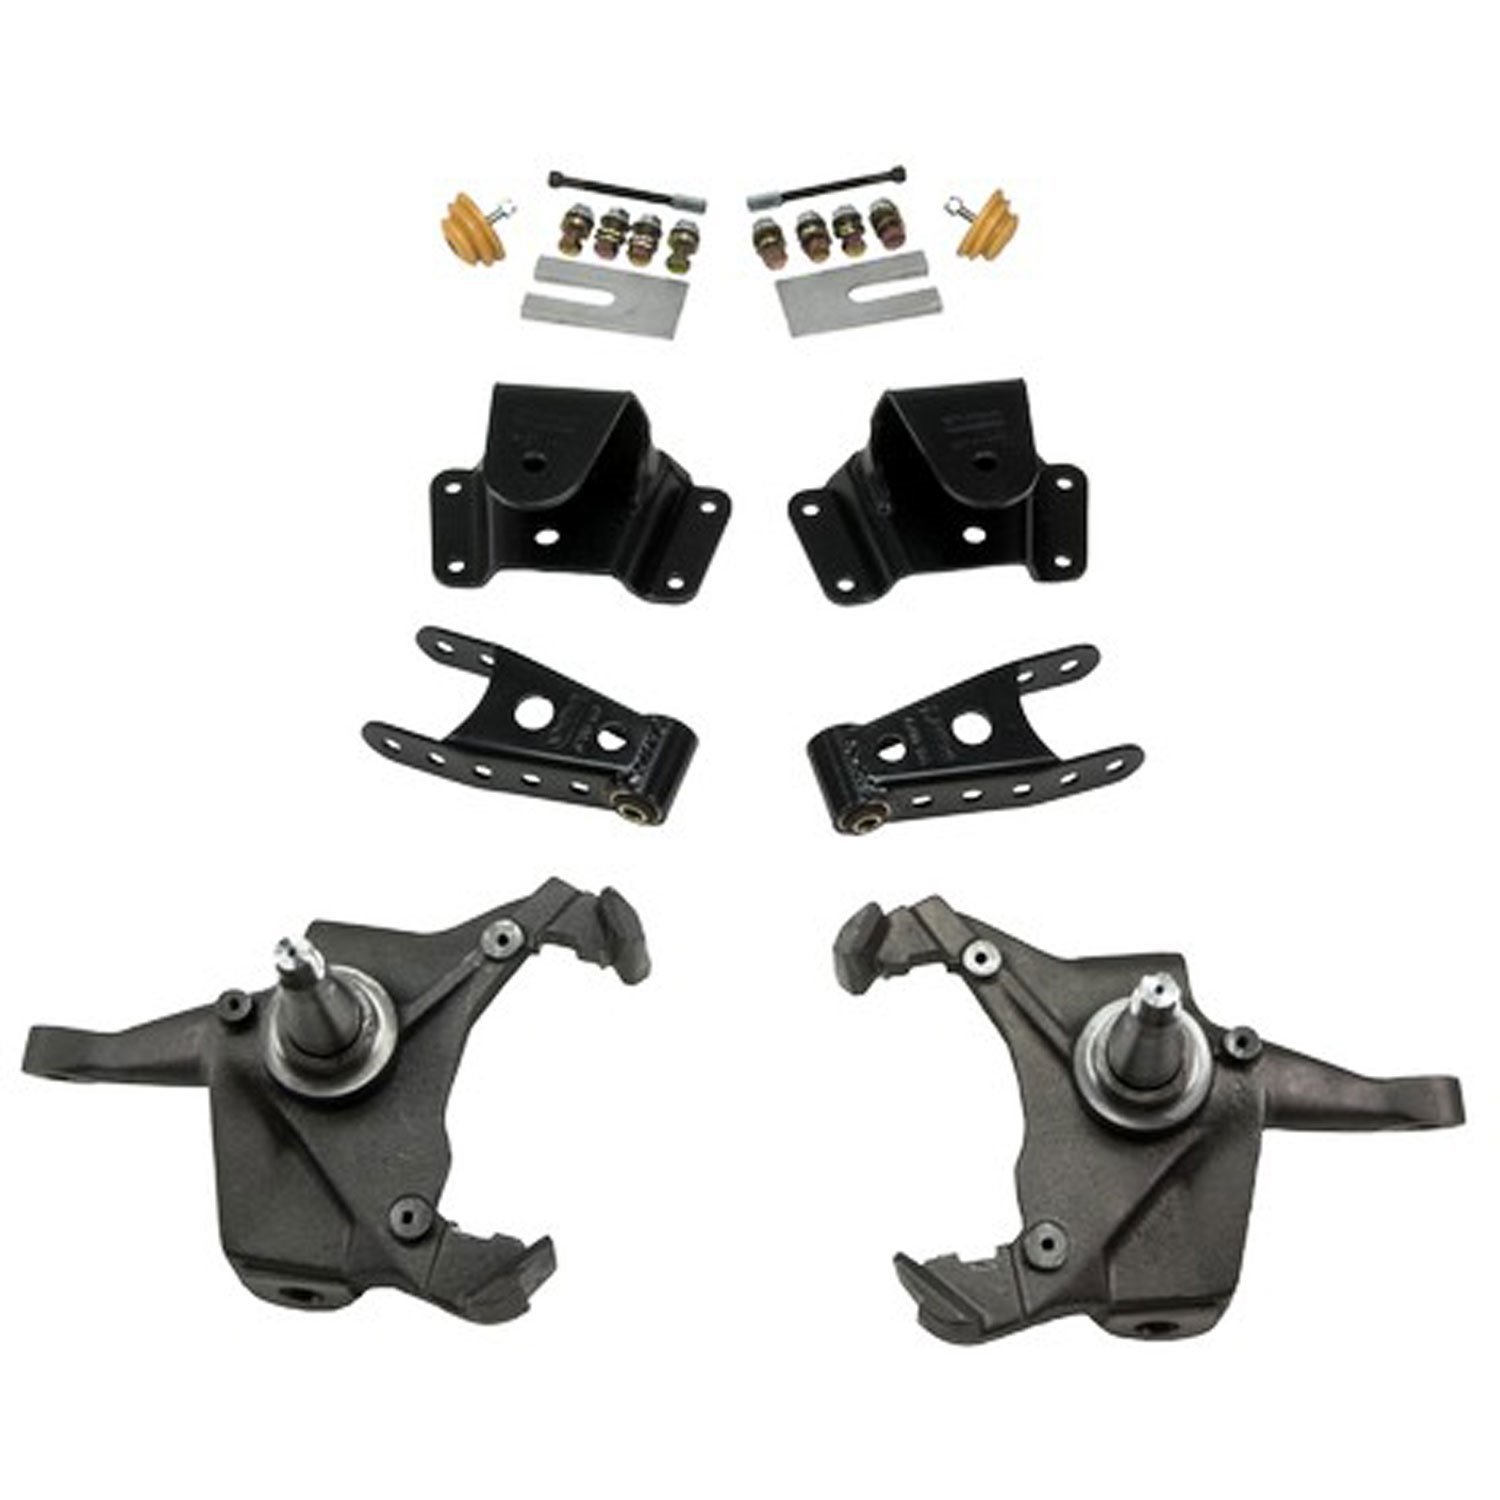 Complete Lowering Kit for 1975-1991 Chevy Silverado C30